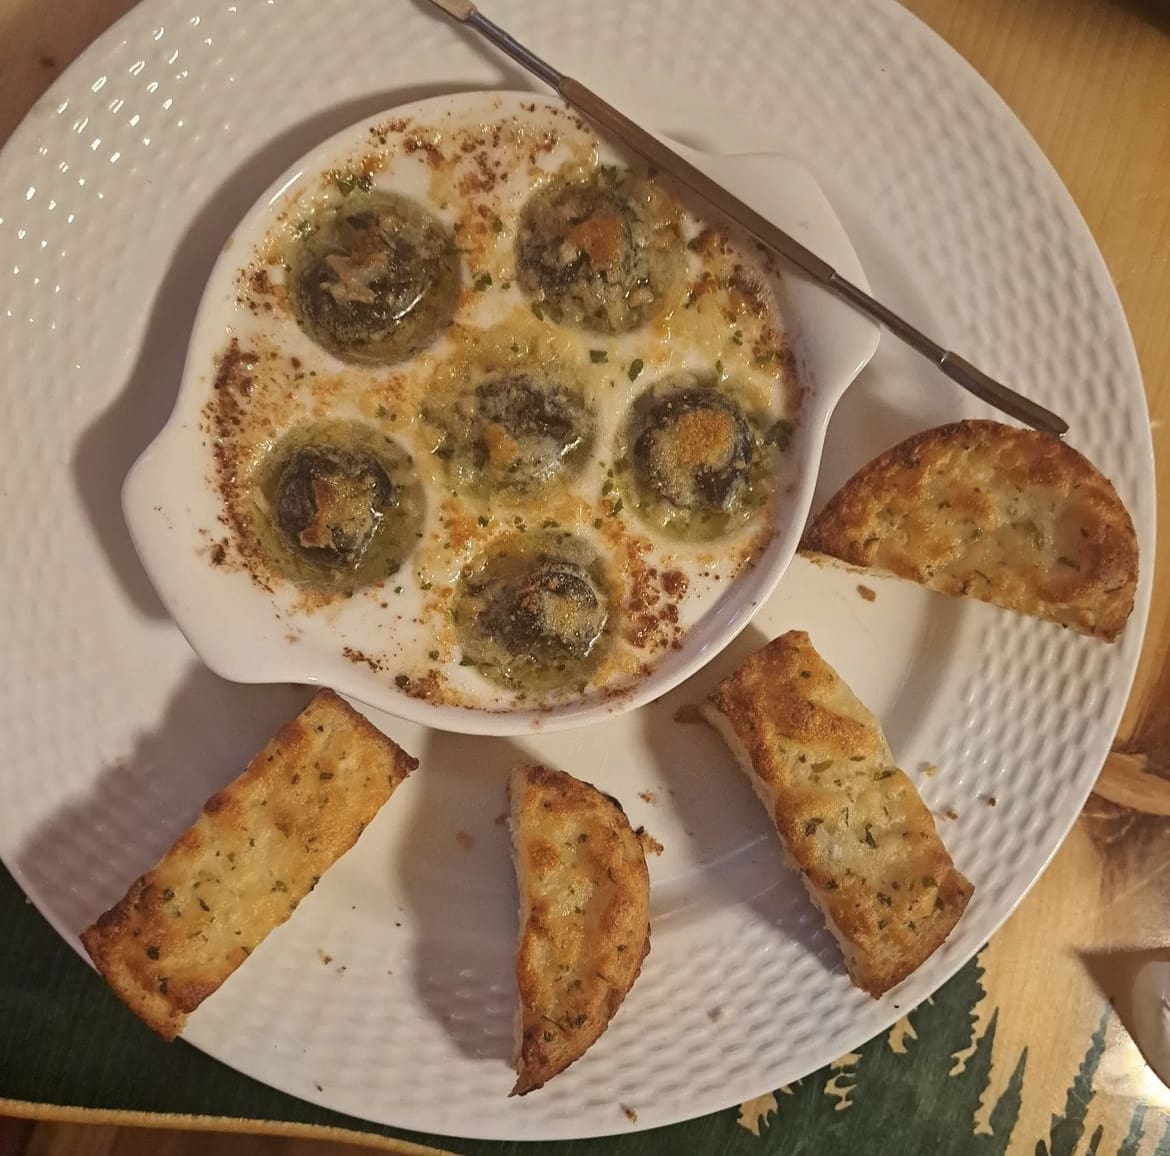 Traditional snails dish in France